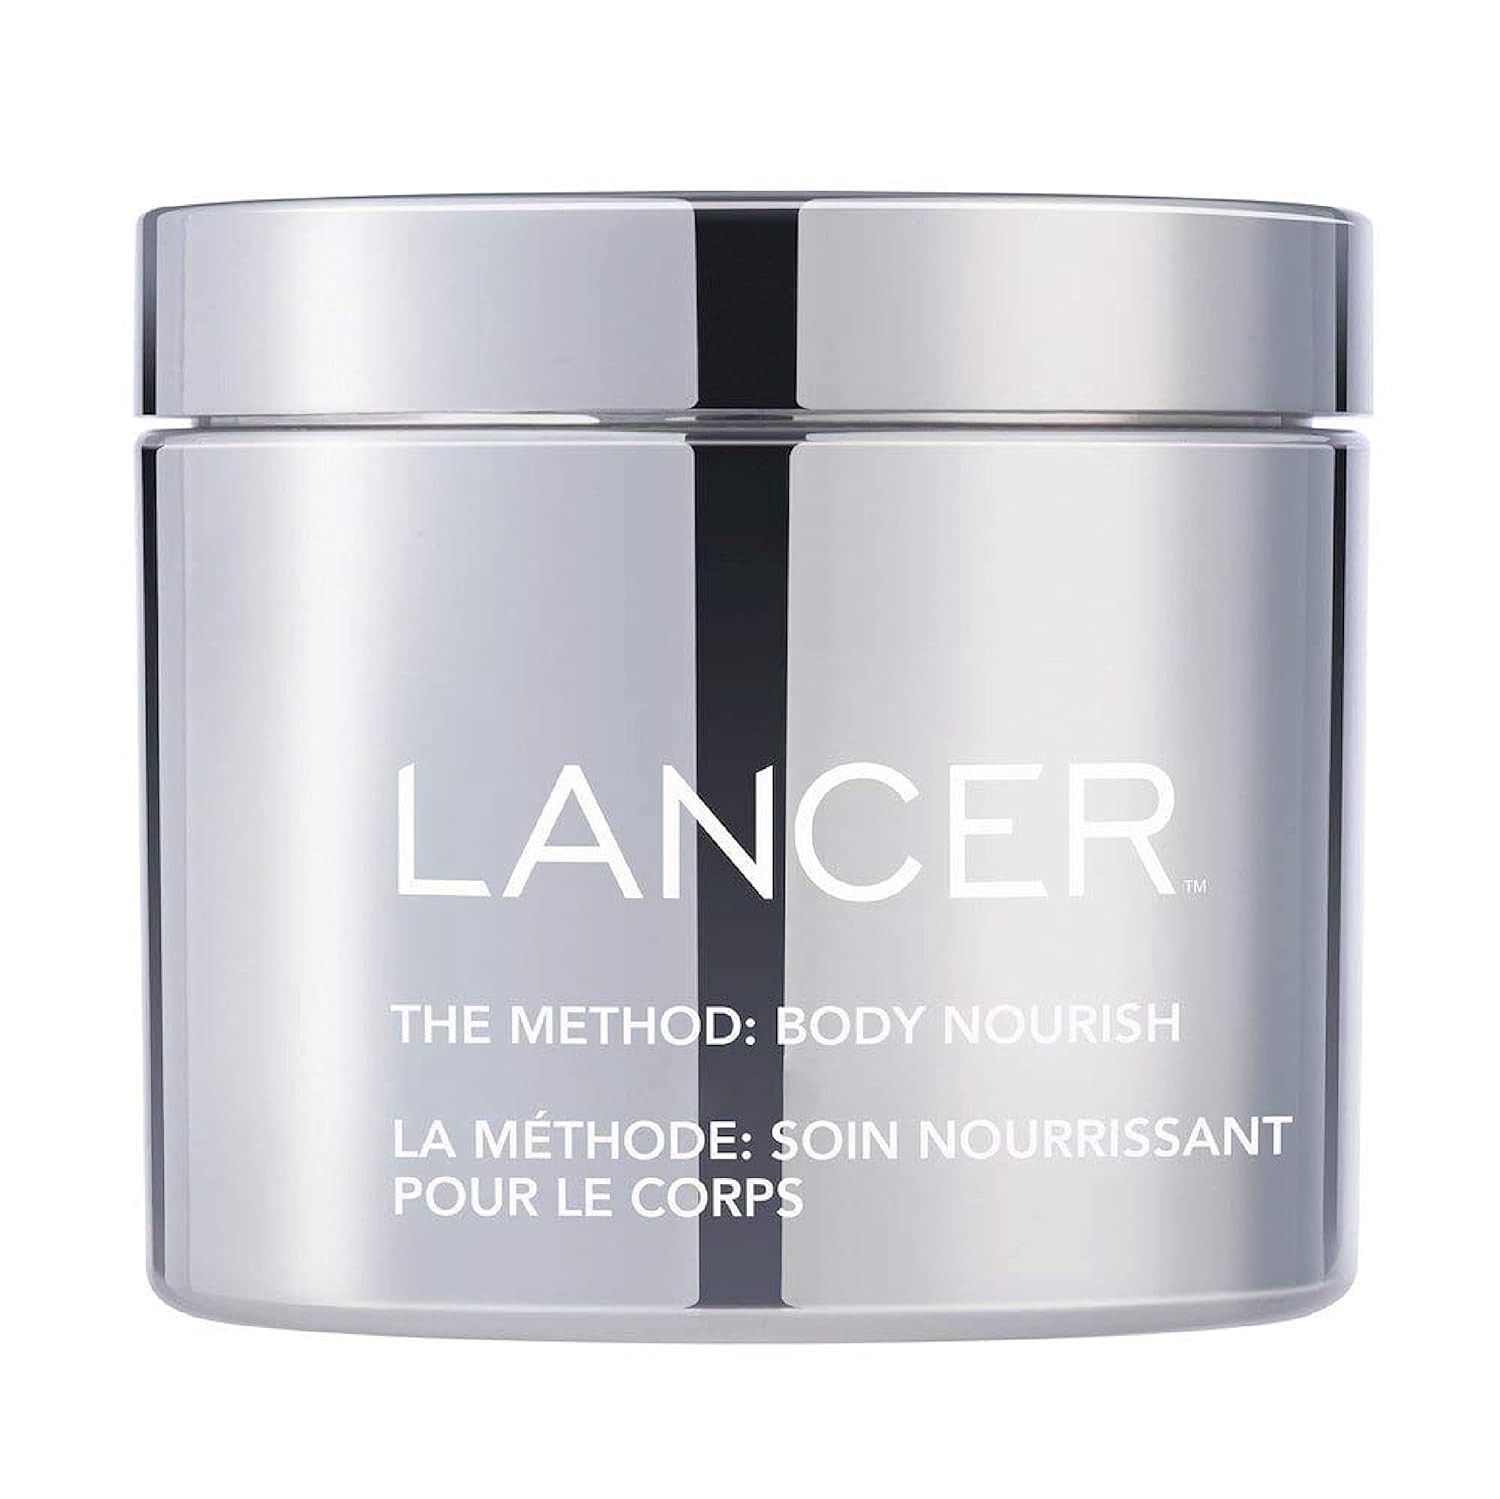 LANCER Skincare The Method: Body Nourish Cream with 10% Glycolic Acid, Anti-Aging Body Lotion for Dry Skin, 11 uid s